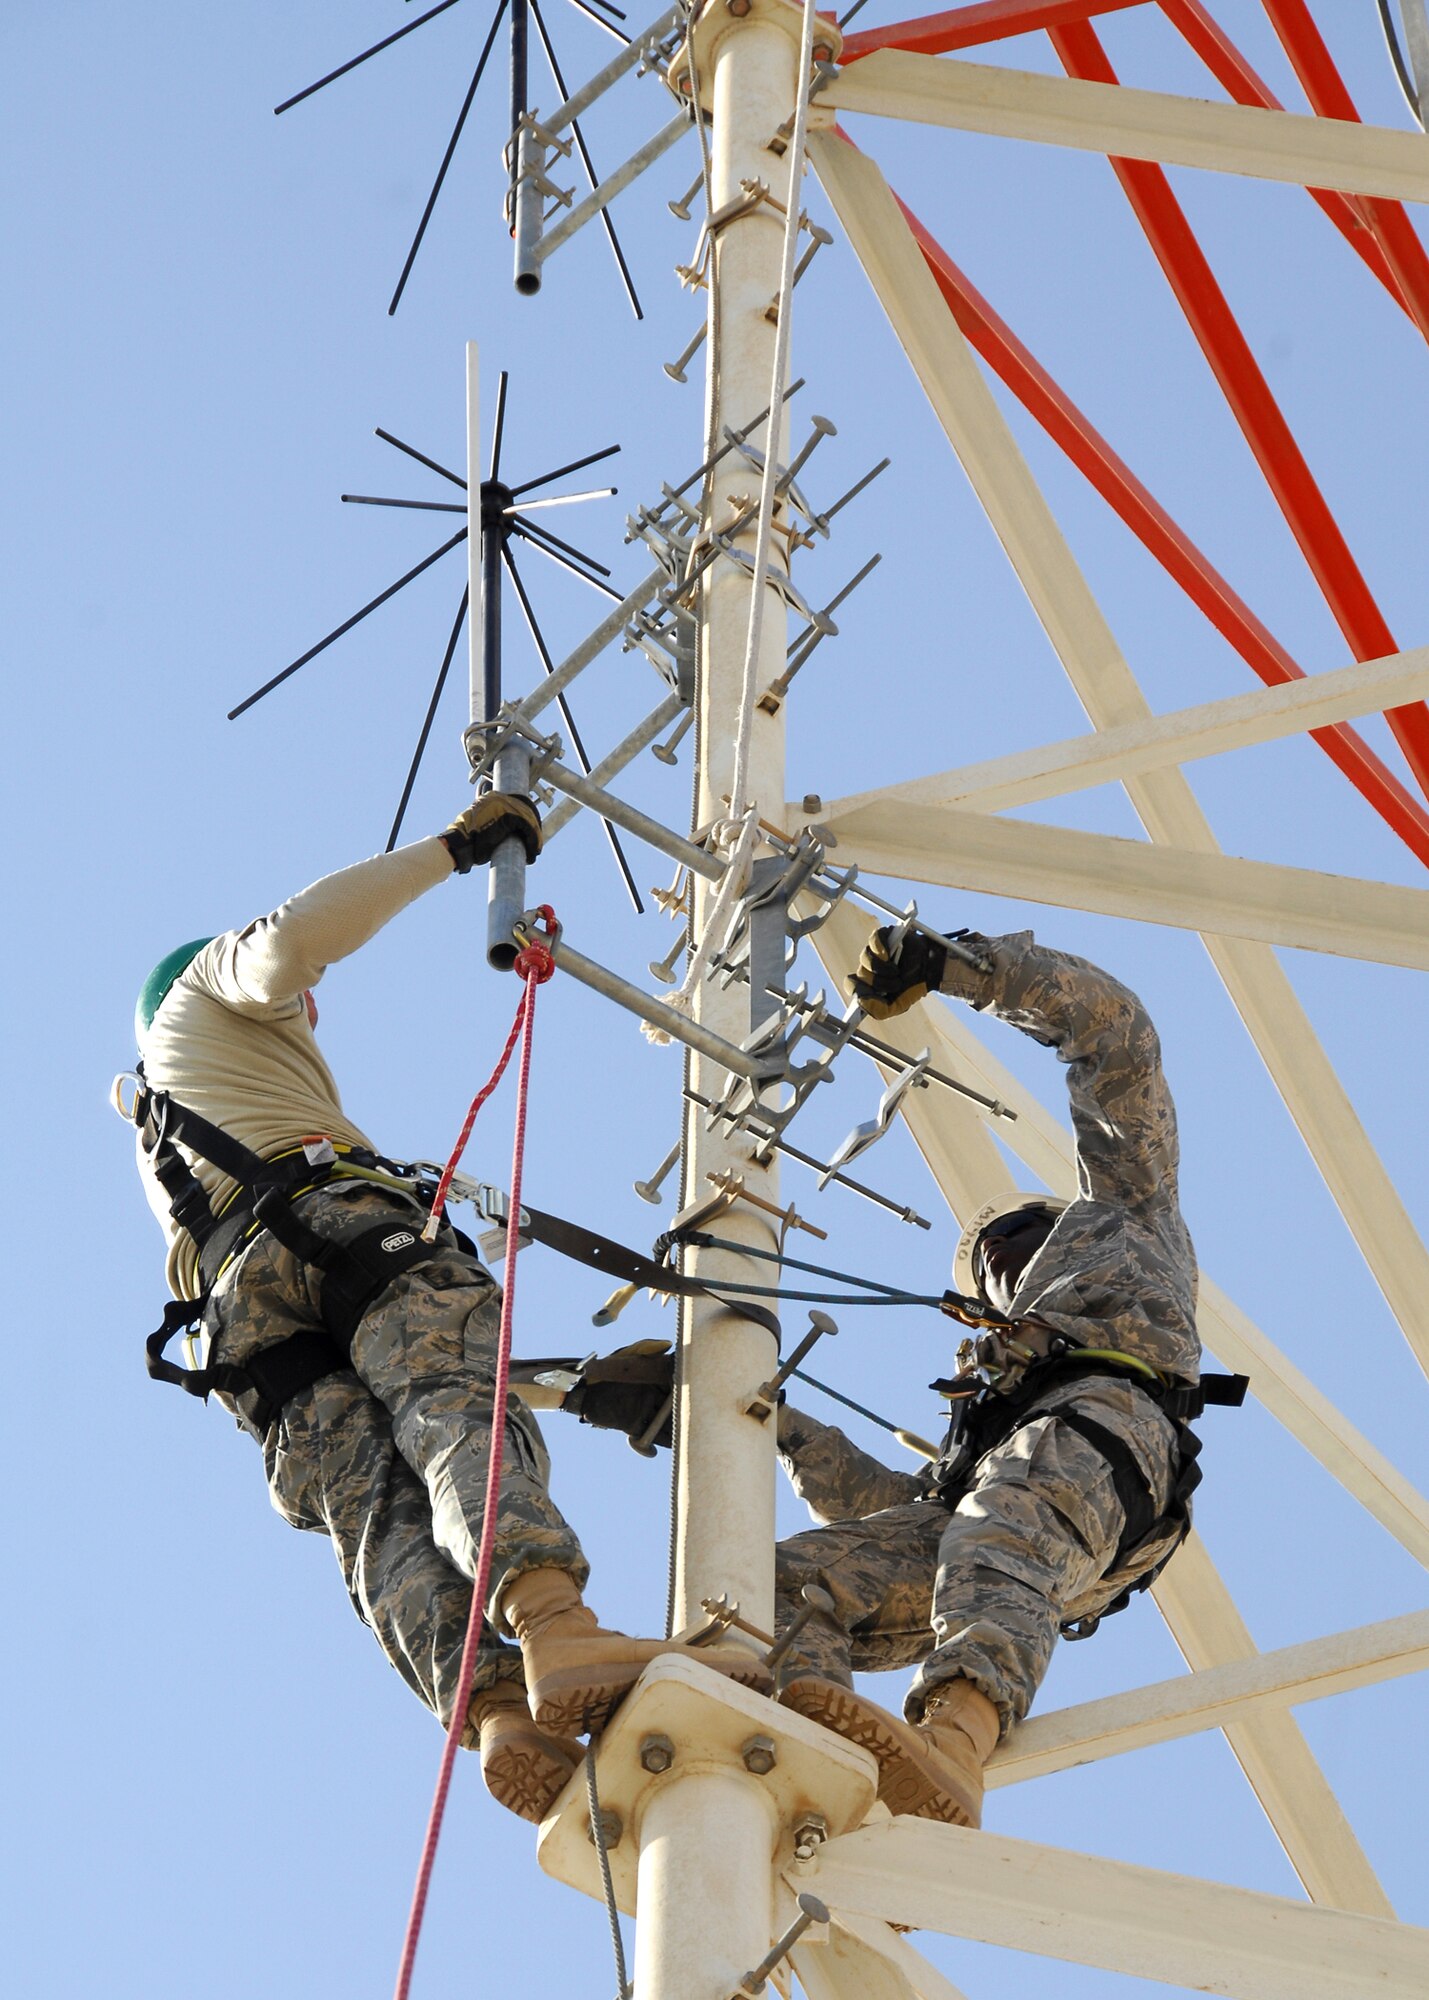 SOUTHWEST ASIA -- Staff Sgt. Ryan Trandell, left, and Senior Airman Lakendrick Fisher, 386th Expeditionary Communication Squadron Cable and Antenna Maintenance technicians, install a Radio Over Internet Protocol (ROIP) antenna to a communications tower on Dec. 15 at an air base in Southwest Asia. The 386th ECS Cable Maintenance shop provides command and control capabilities through installation, maintenance, fault isolation and reconstitution of fixed cable and wireless distribution systems, local area networks and wide area networks in support of tactical and strategic operations. Sergeant Trandell and Airman Fisher are deployed from Yokota Air Base, Japan. (U.S. Air Force photo/Tech. Sgt. Raheem Moore)